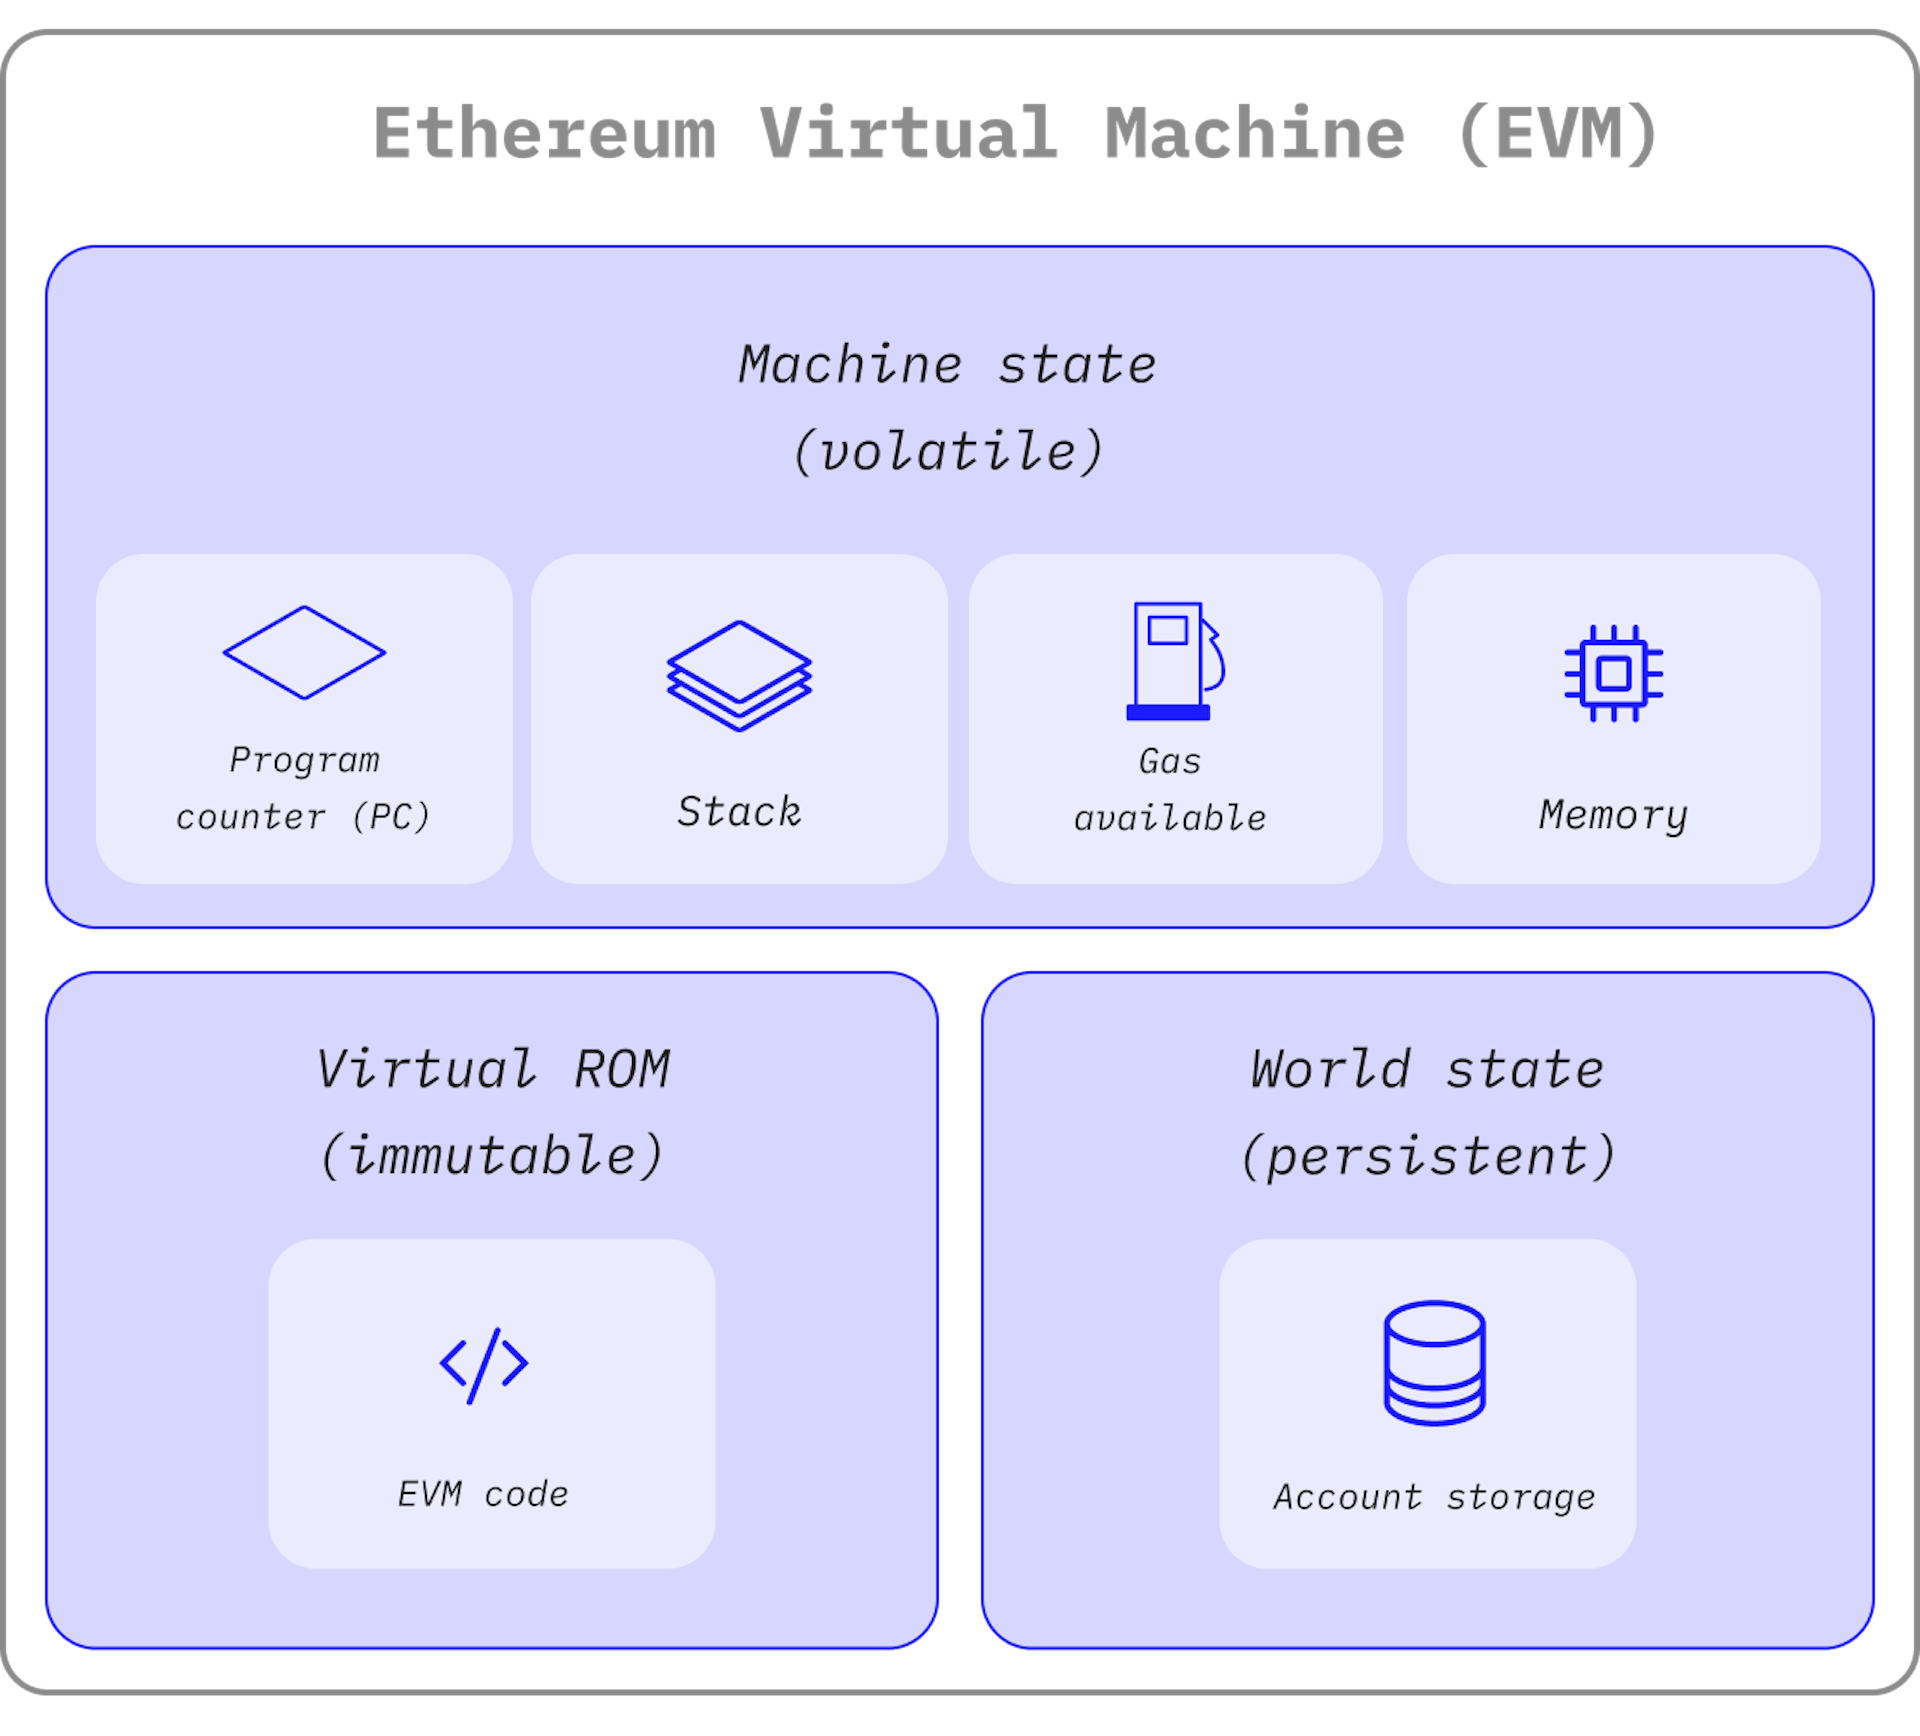 A diagram showing the make up of the EVM